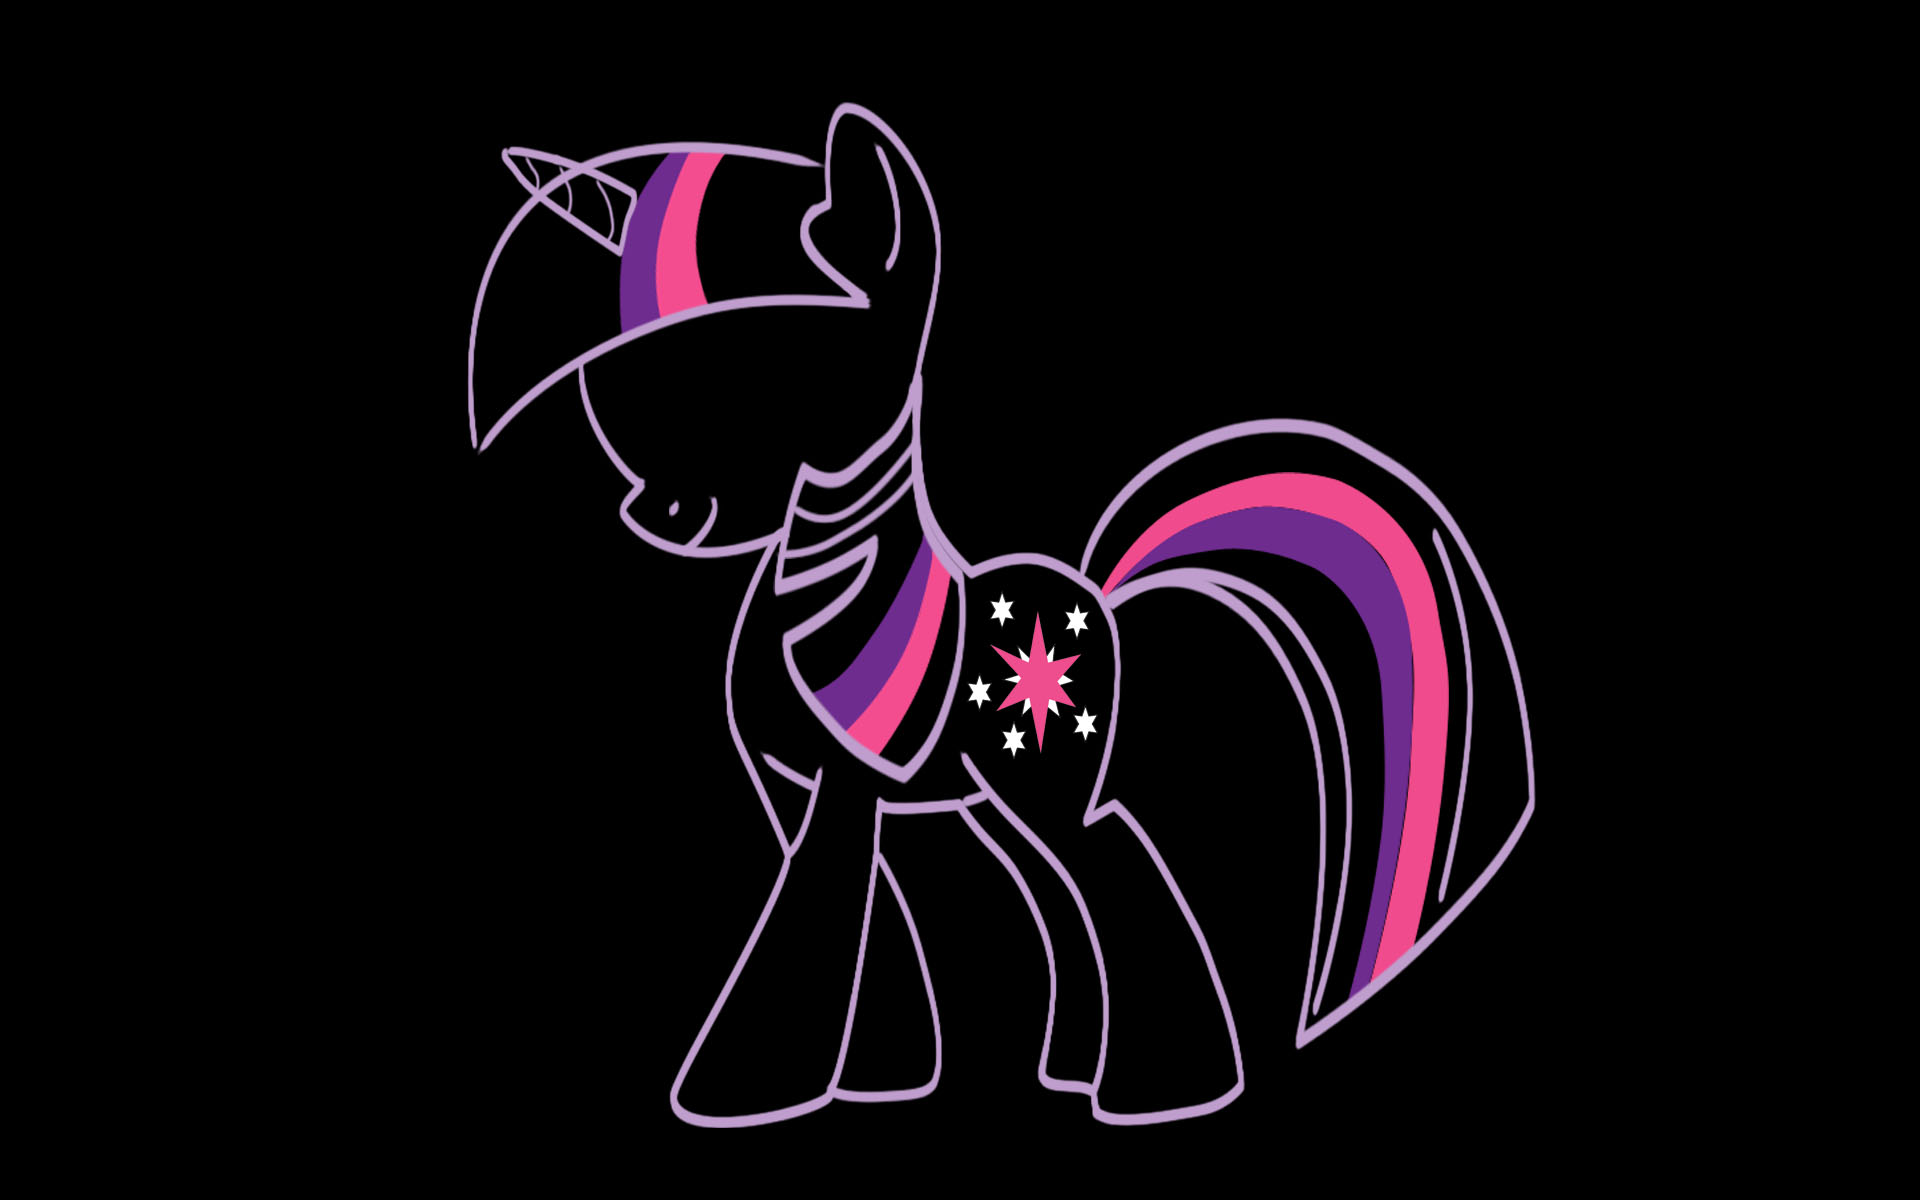 Twilight Sparkle Silhouette by P0nies